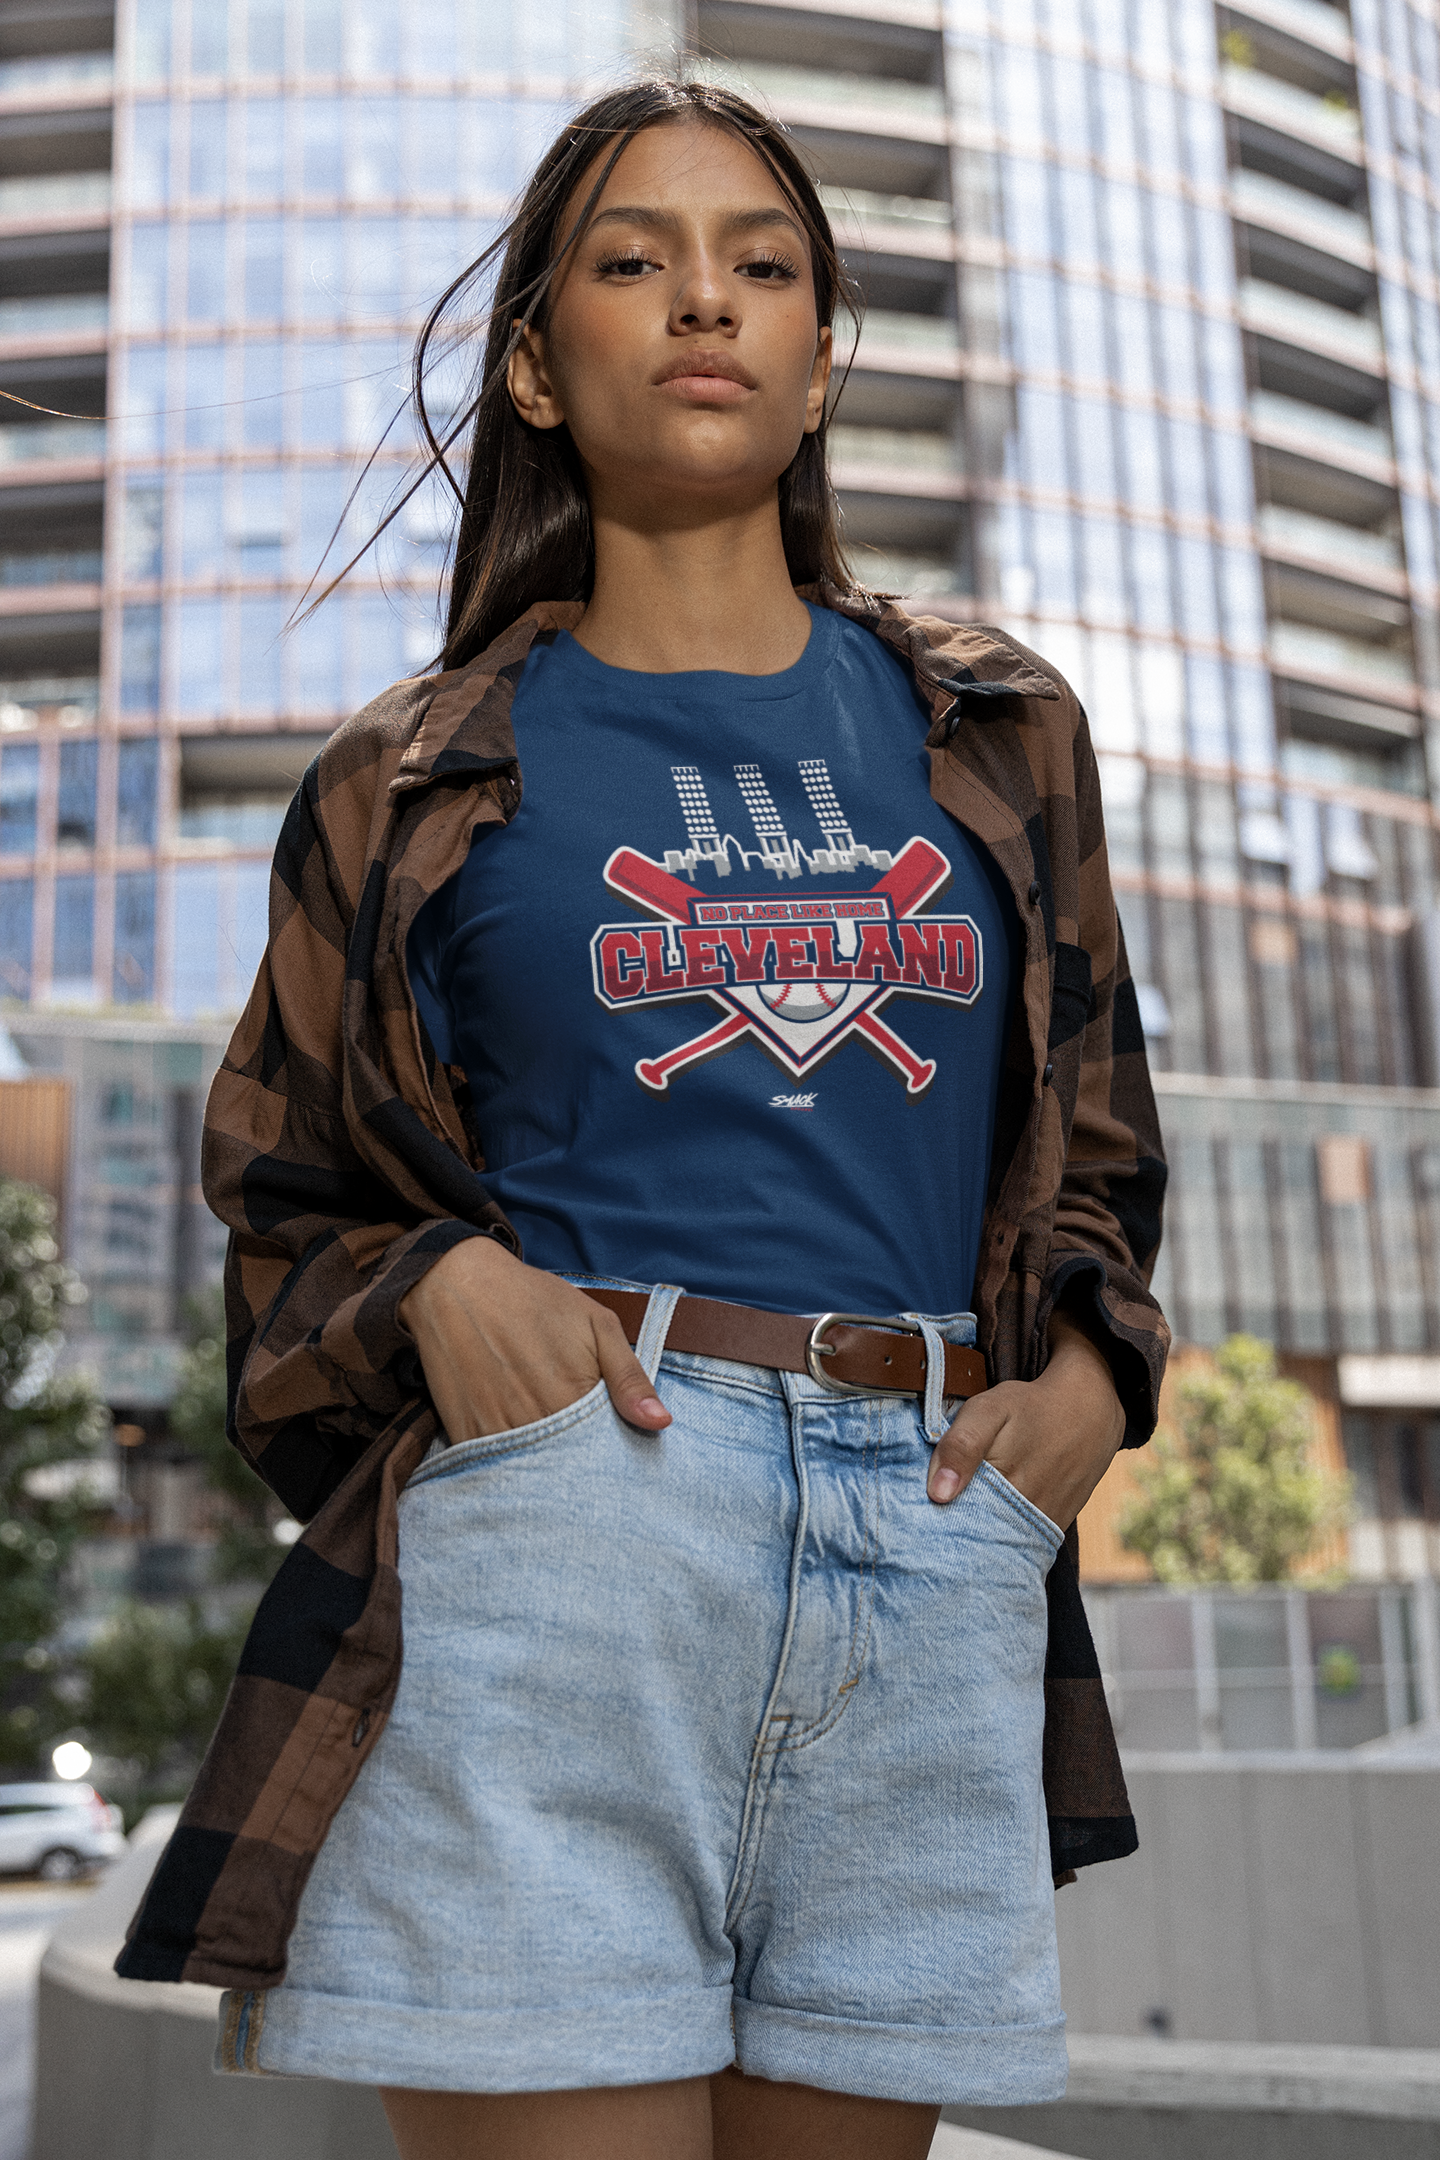 No Place Like Home T-Shirt for Cleveland Baseball Fans